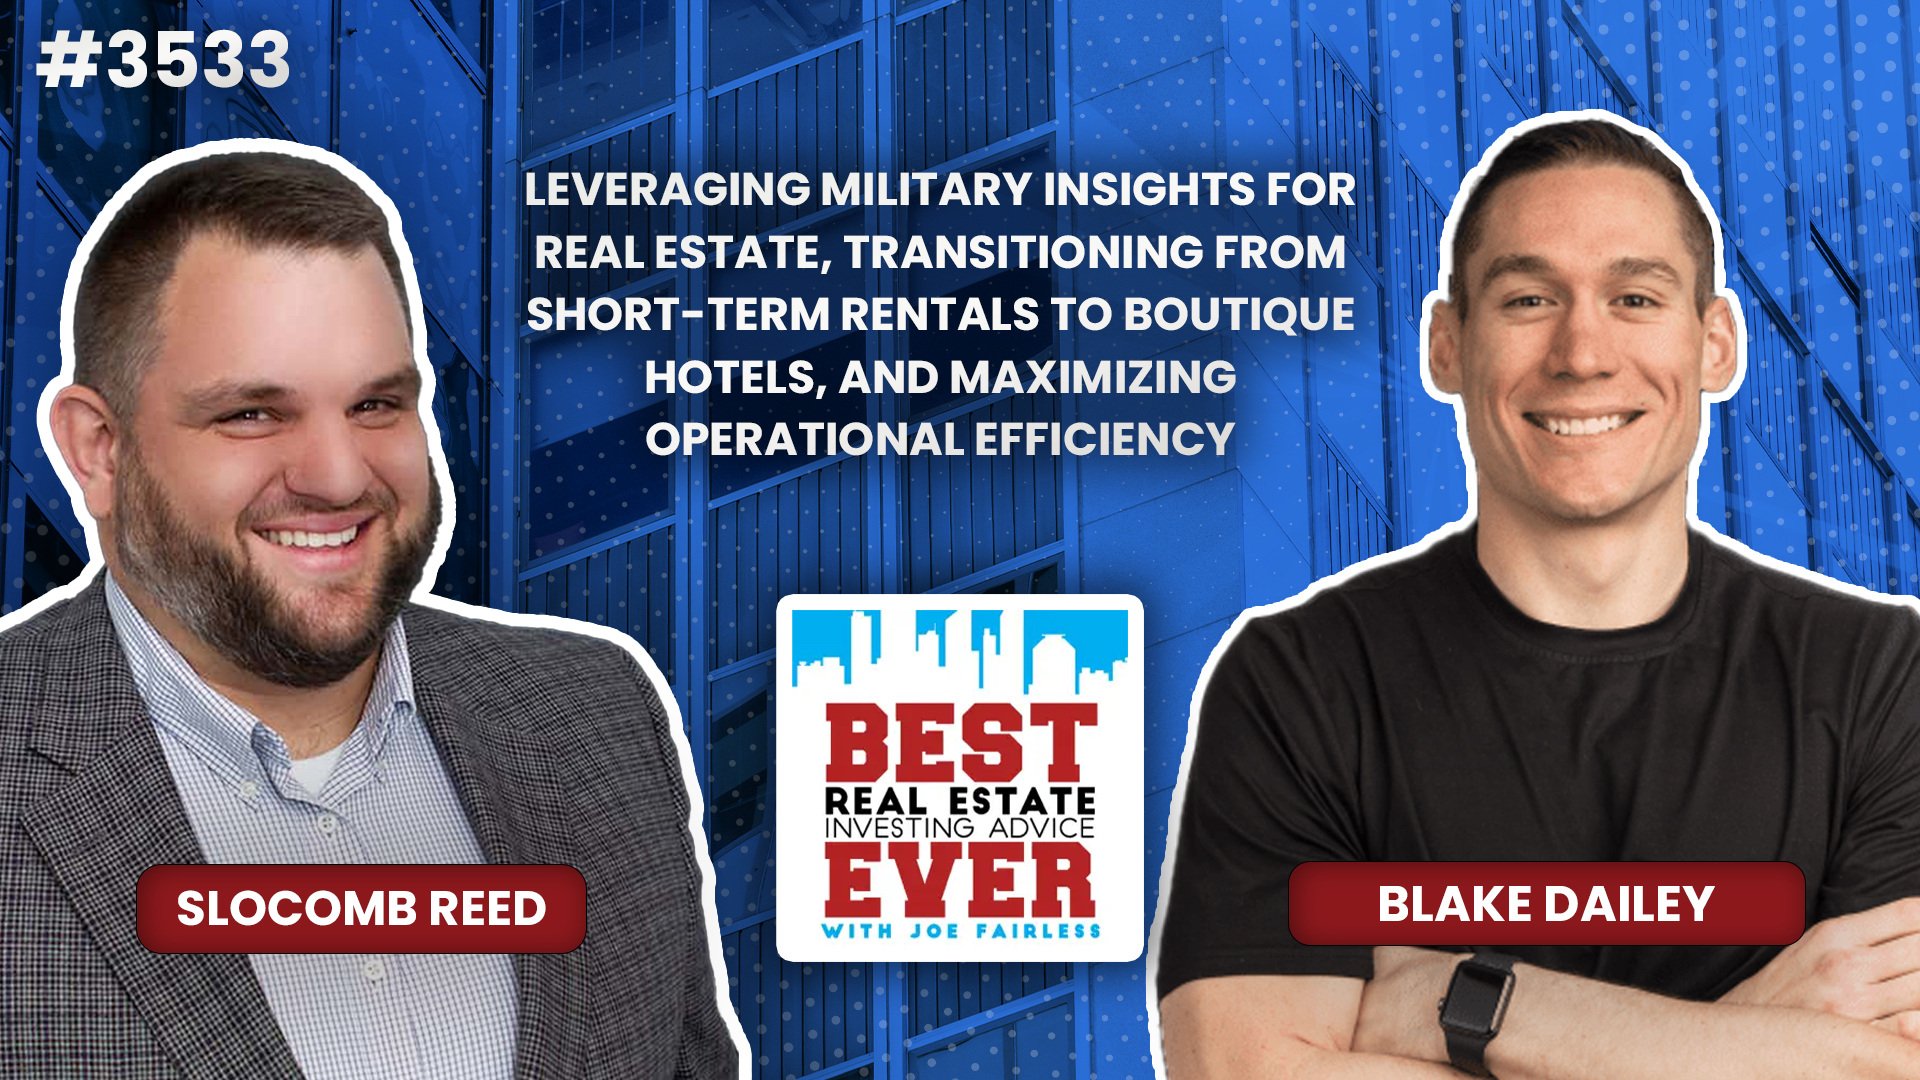 JF3533: Leveraging Military Insights for Real Estate, Transitioning from Short-term Rentals to Boutique Hotels, and Maximizing Operational Efficiency ft. Blake Dailey